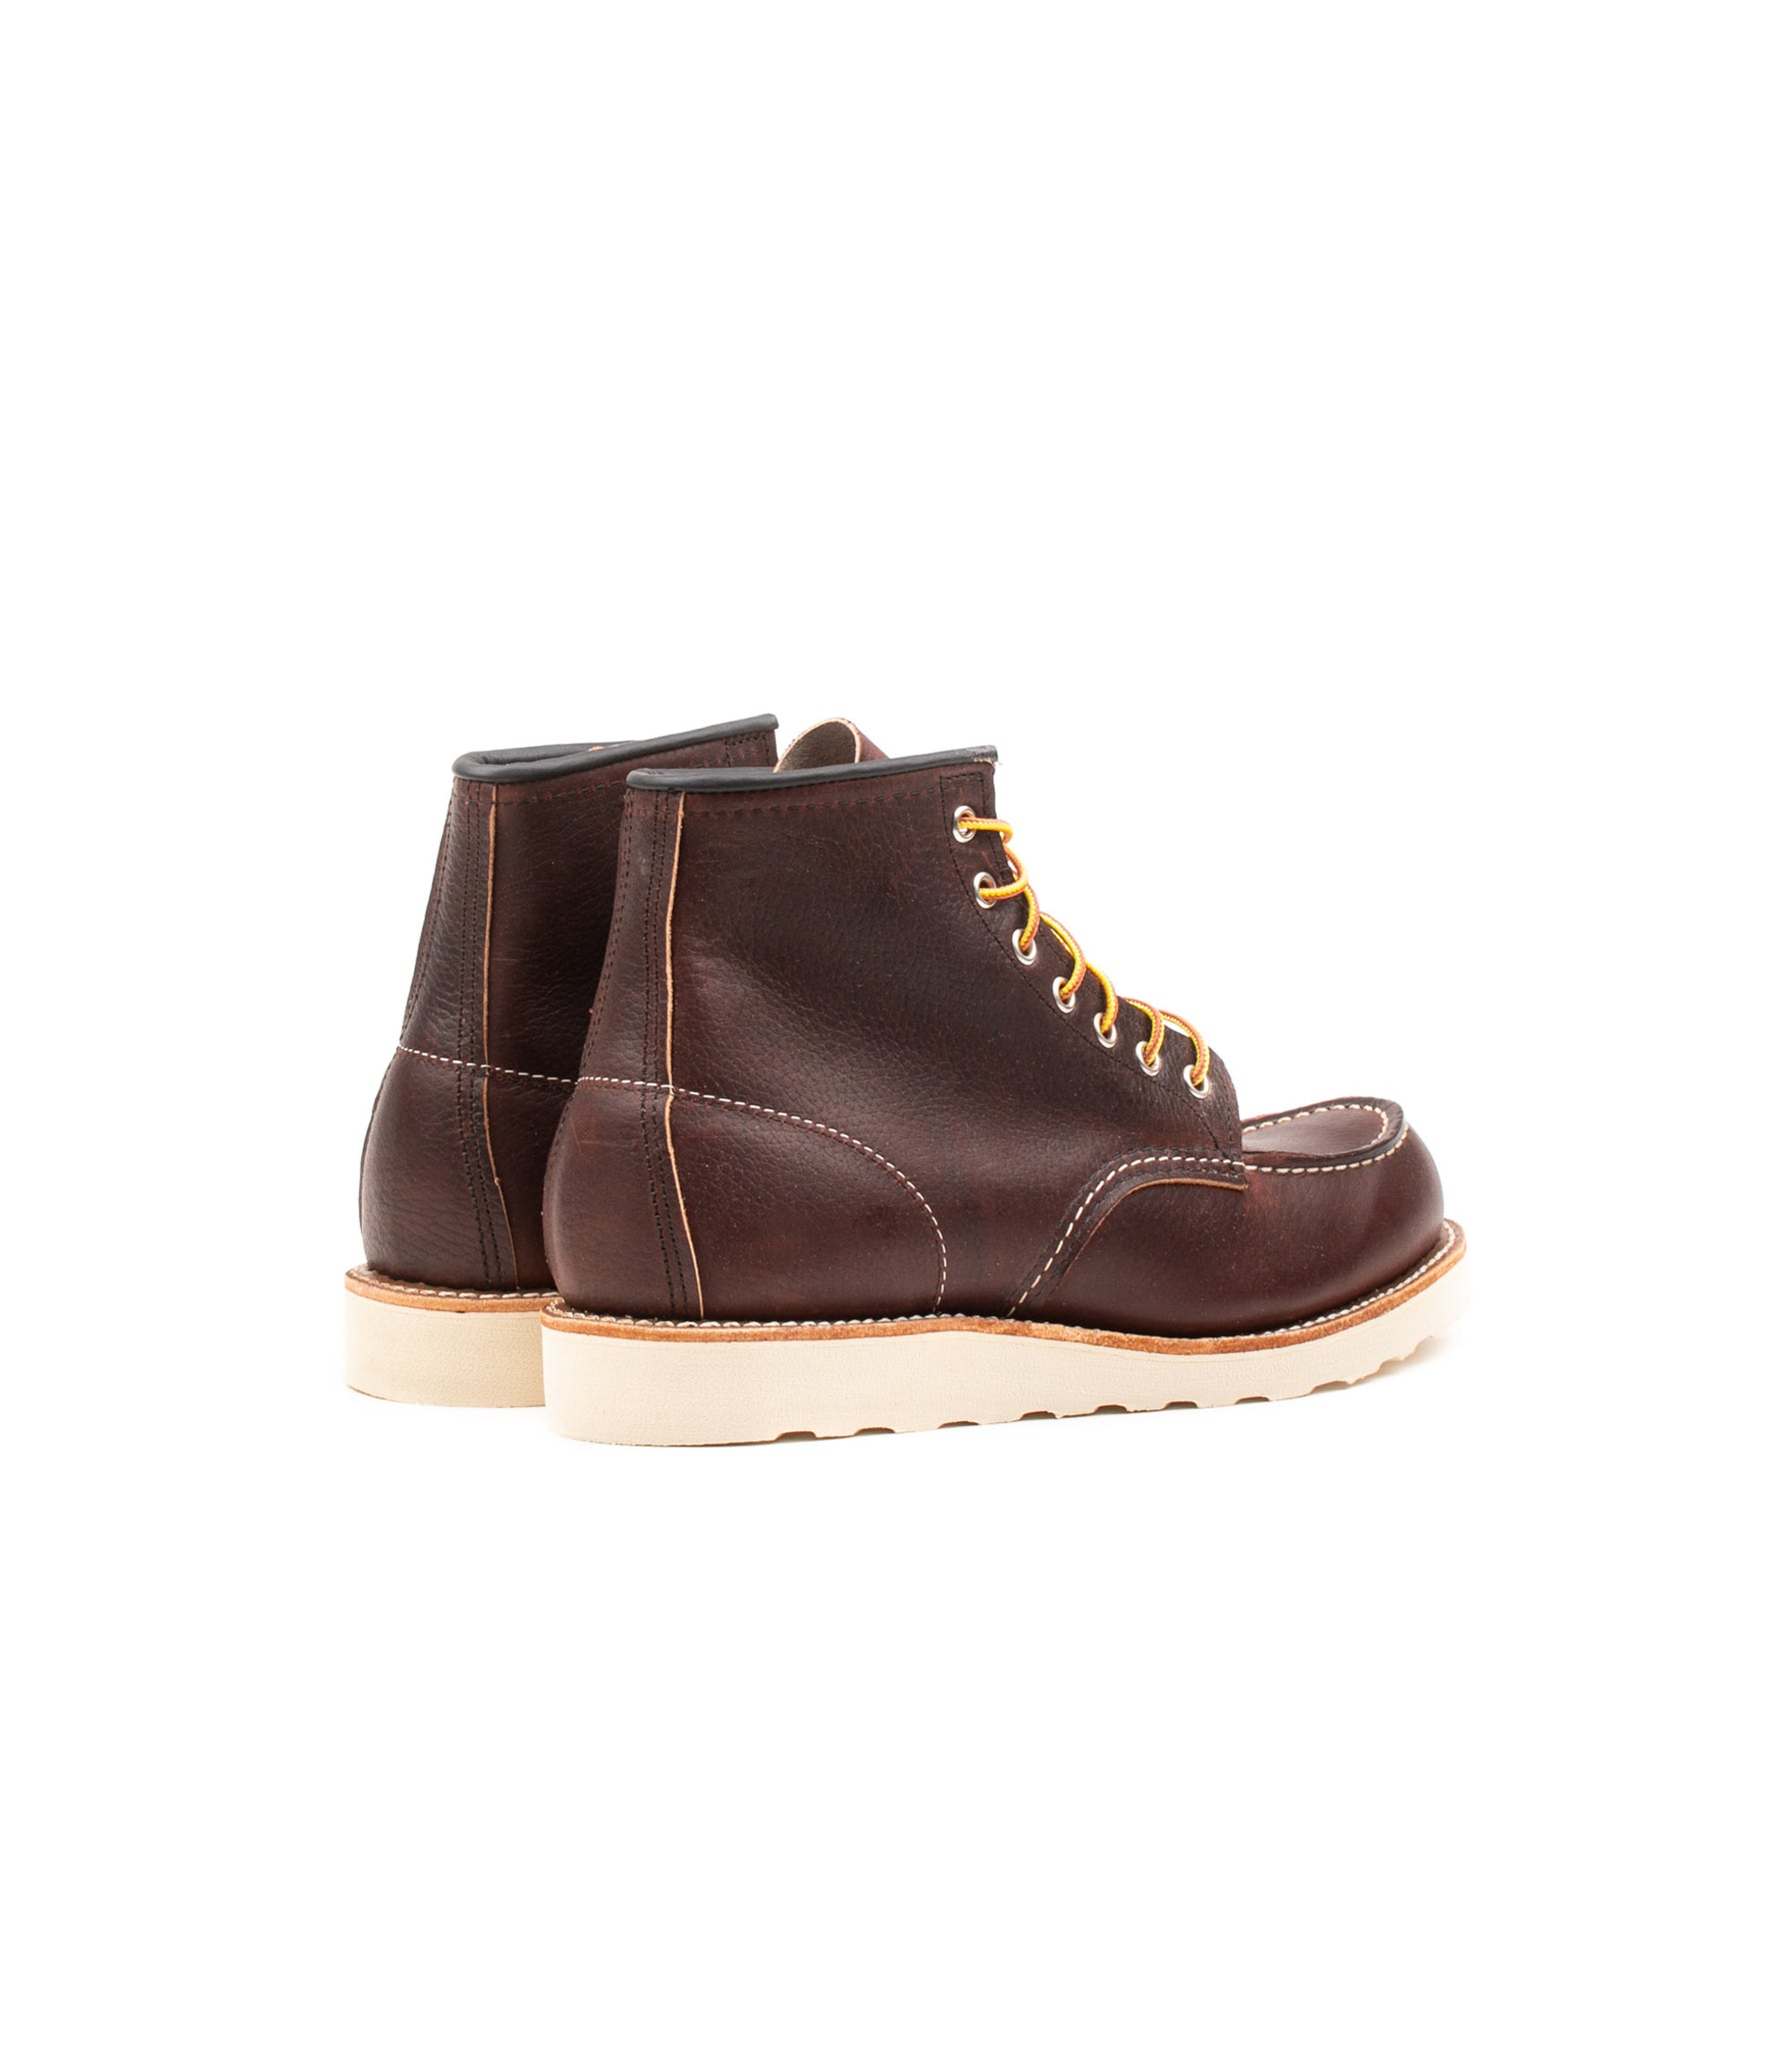 Red Wing Classic Moc 6 Inch Marrone Briar Pelle